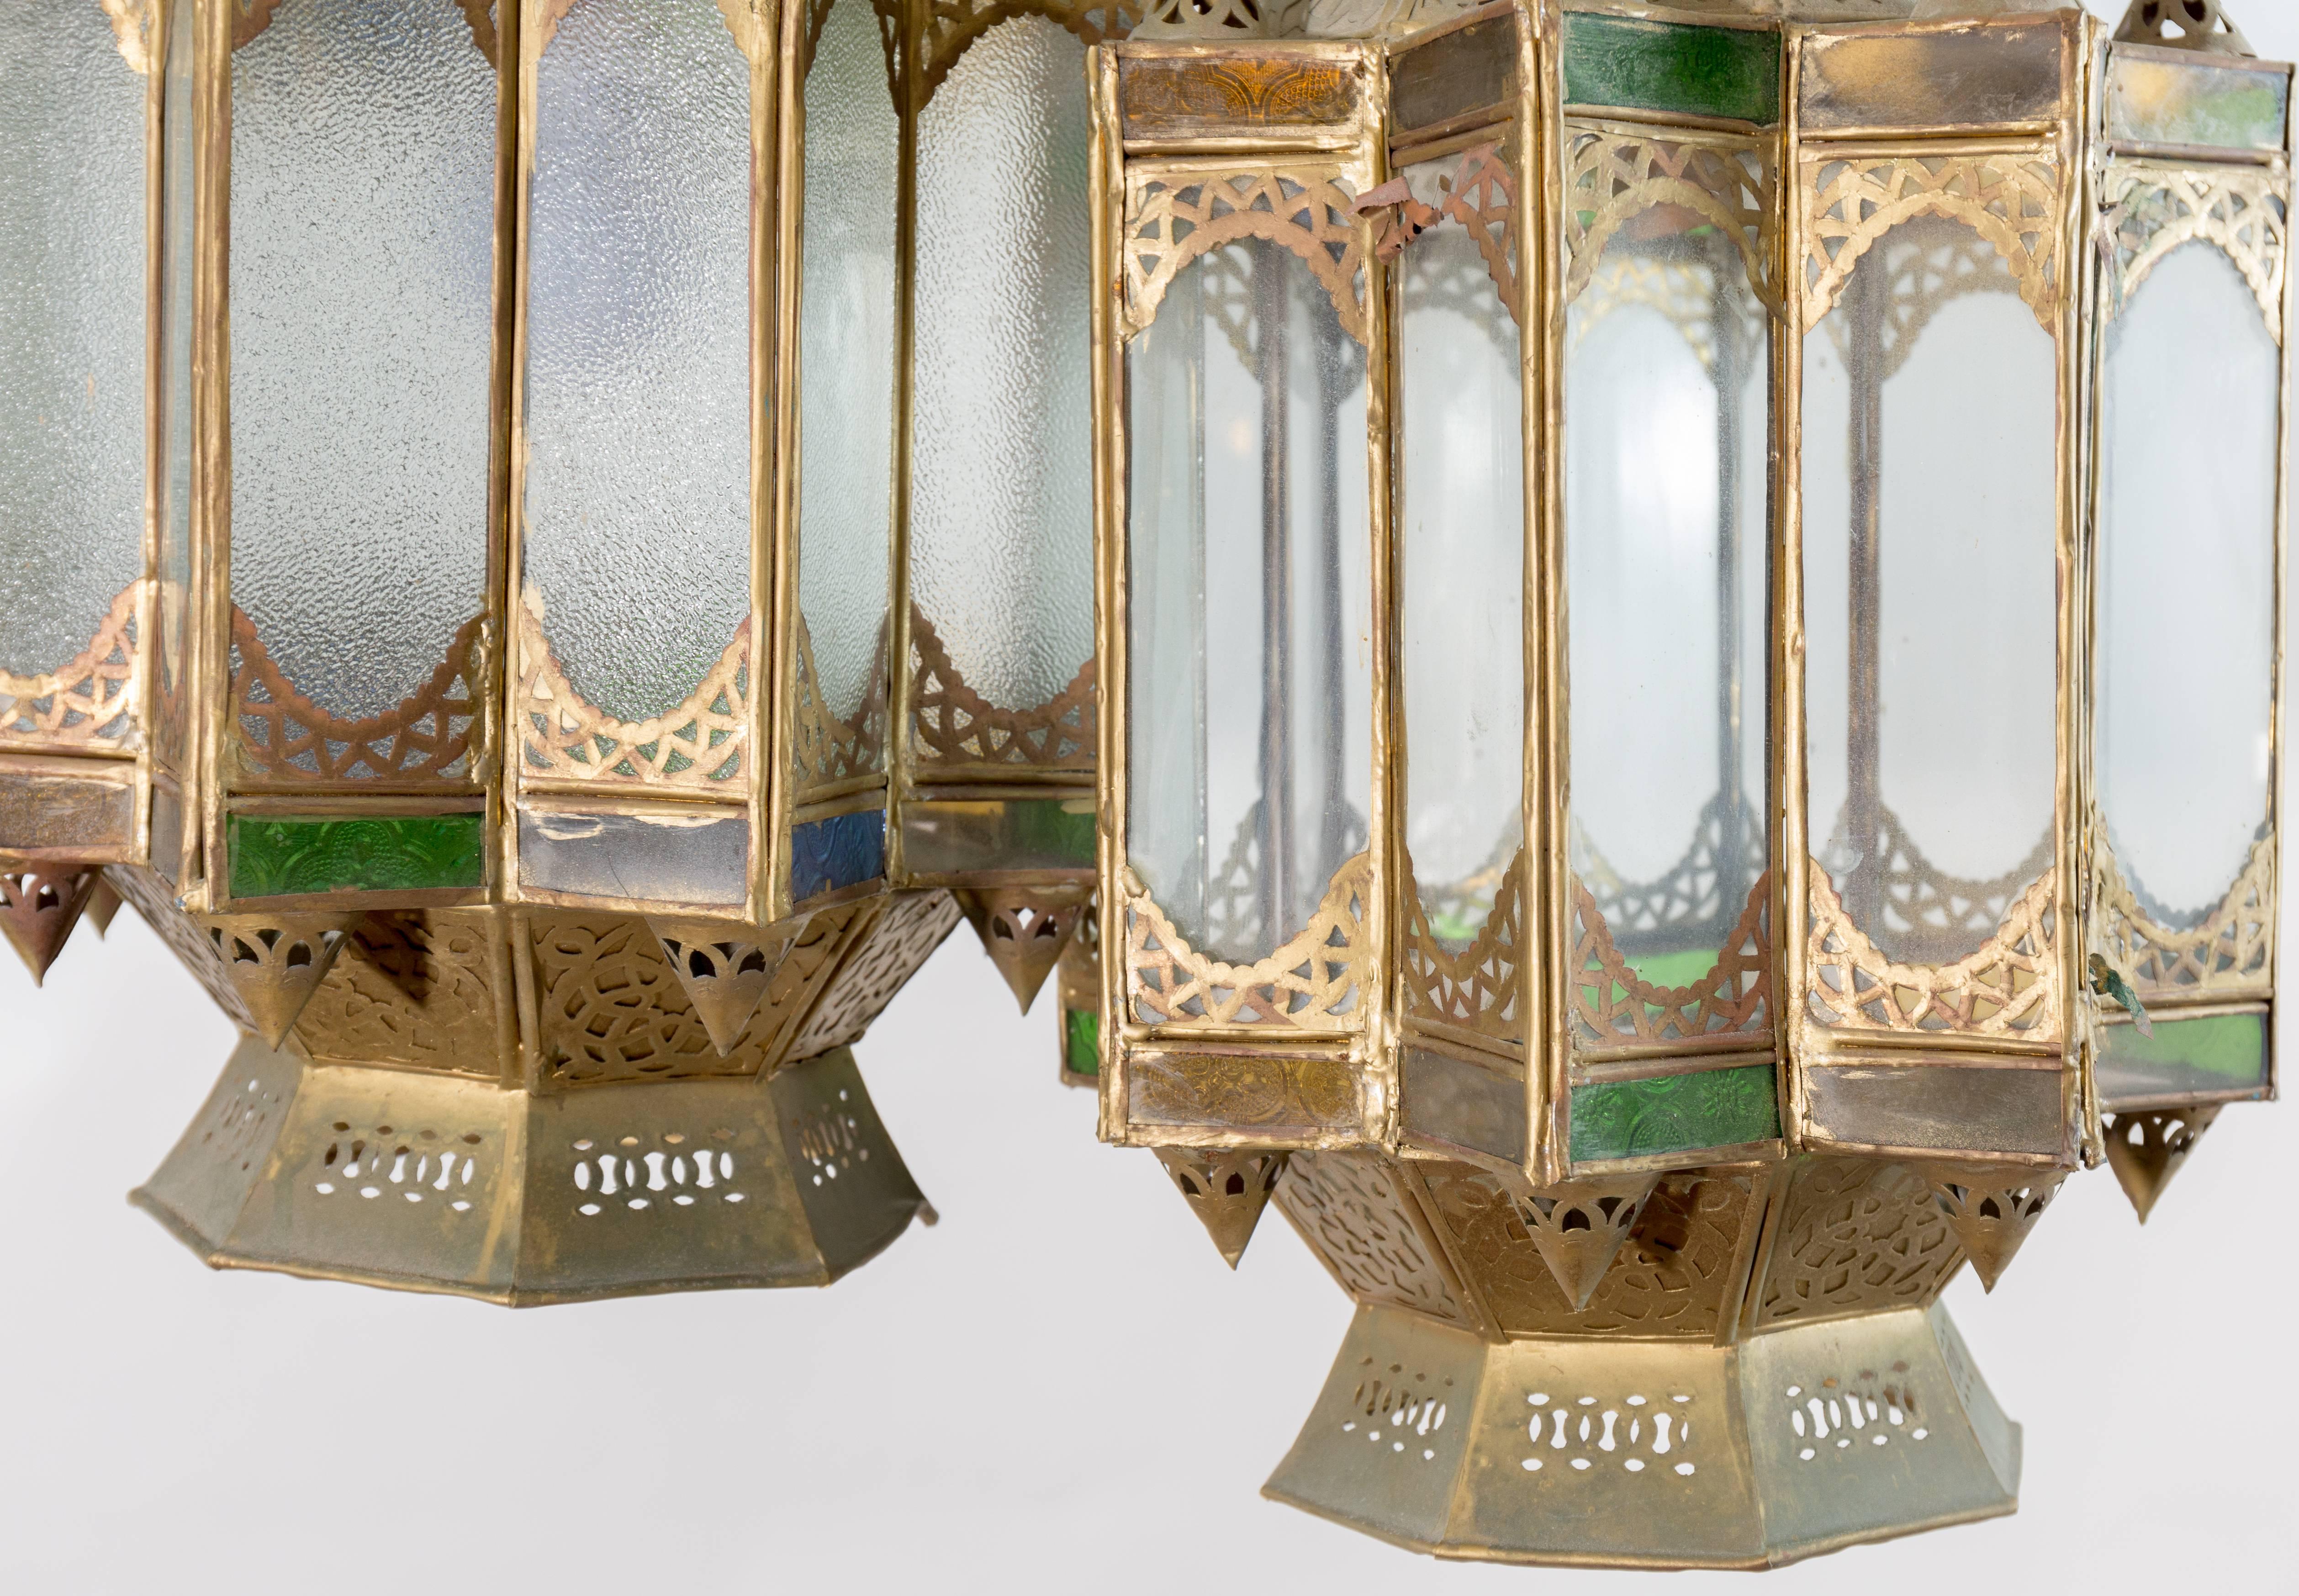 This cluster of five makes a statement all together. The pieces are less than perfect. Like a folk gathering in a gypsy tent these Moroccan pendants will add texture and intrigue to your decor! Wired for bulbs! Candles could work too!